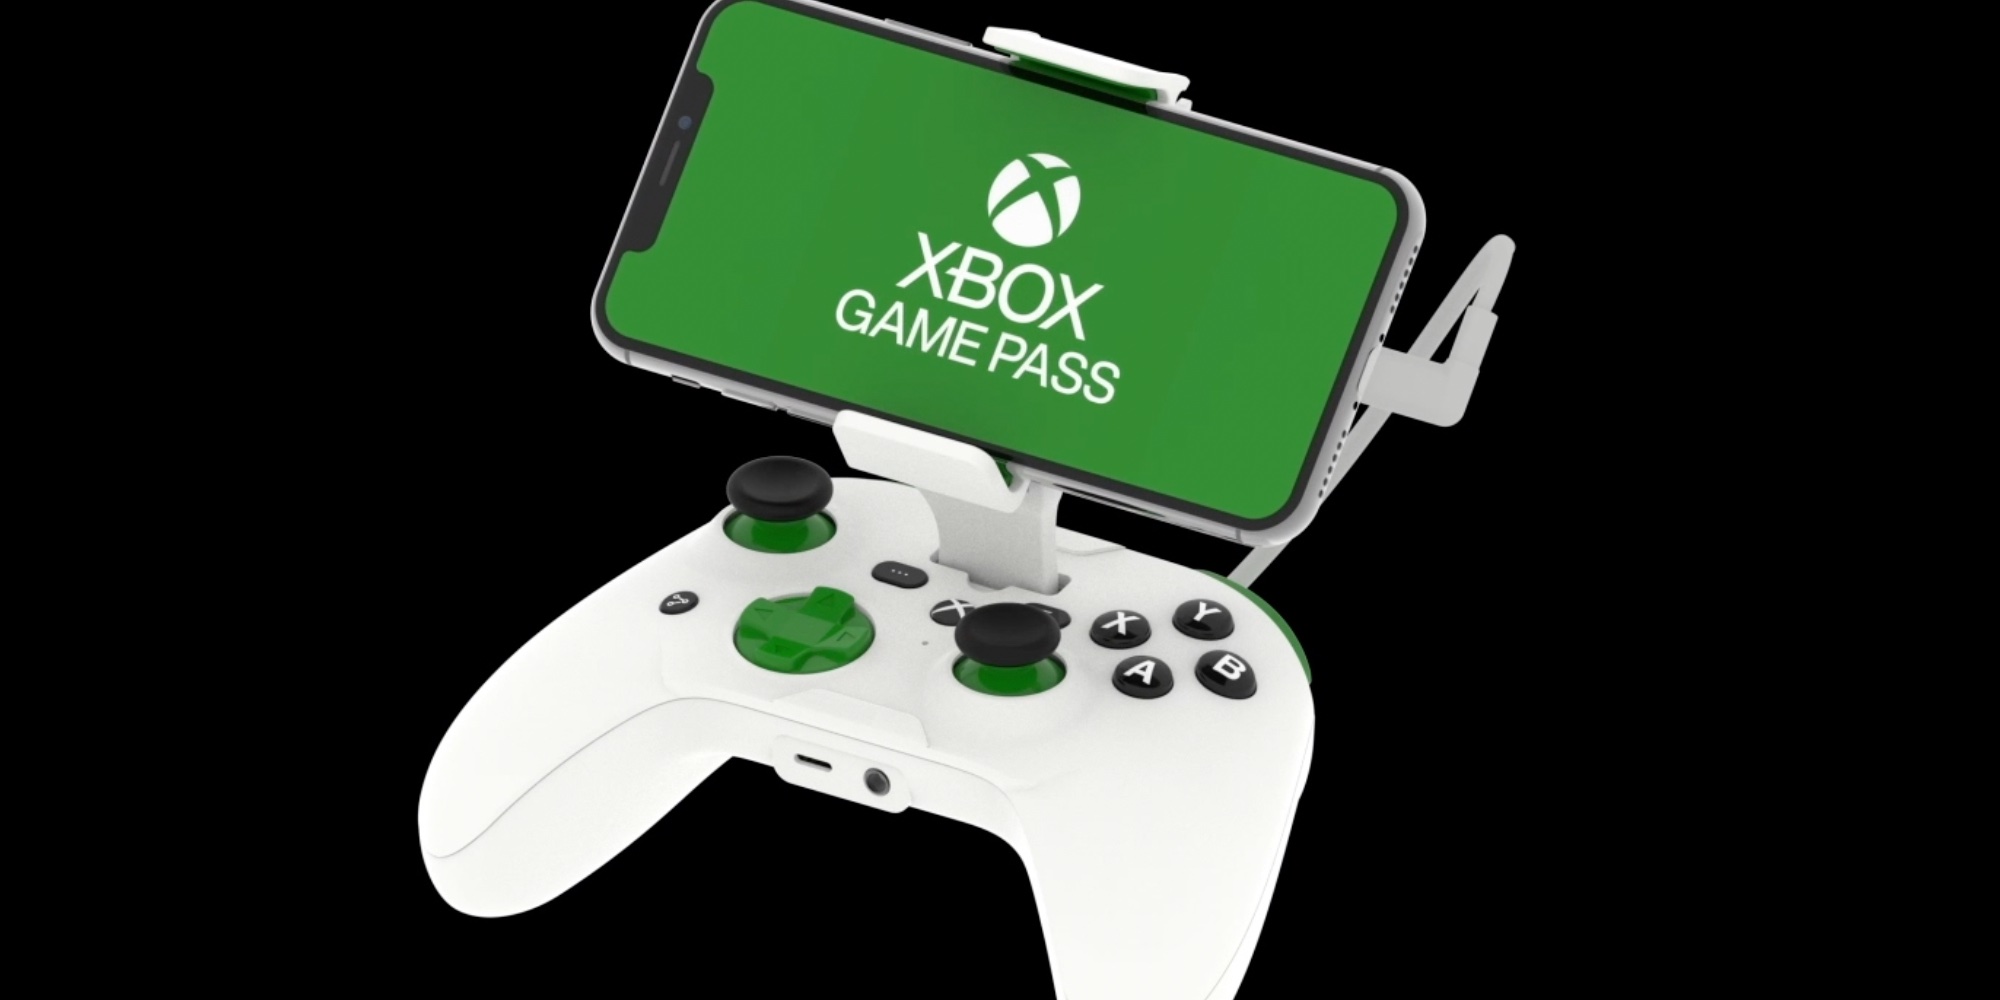 This iPhone game controller is designed for Xbox Cloud Gaming